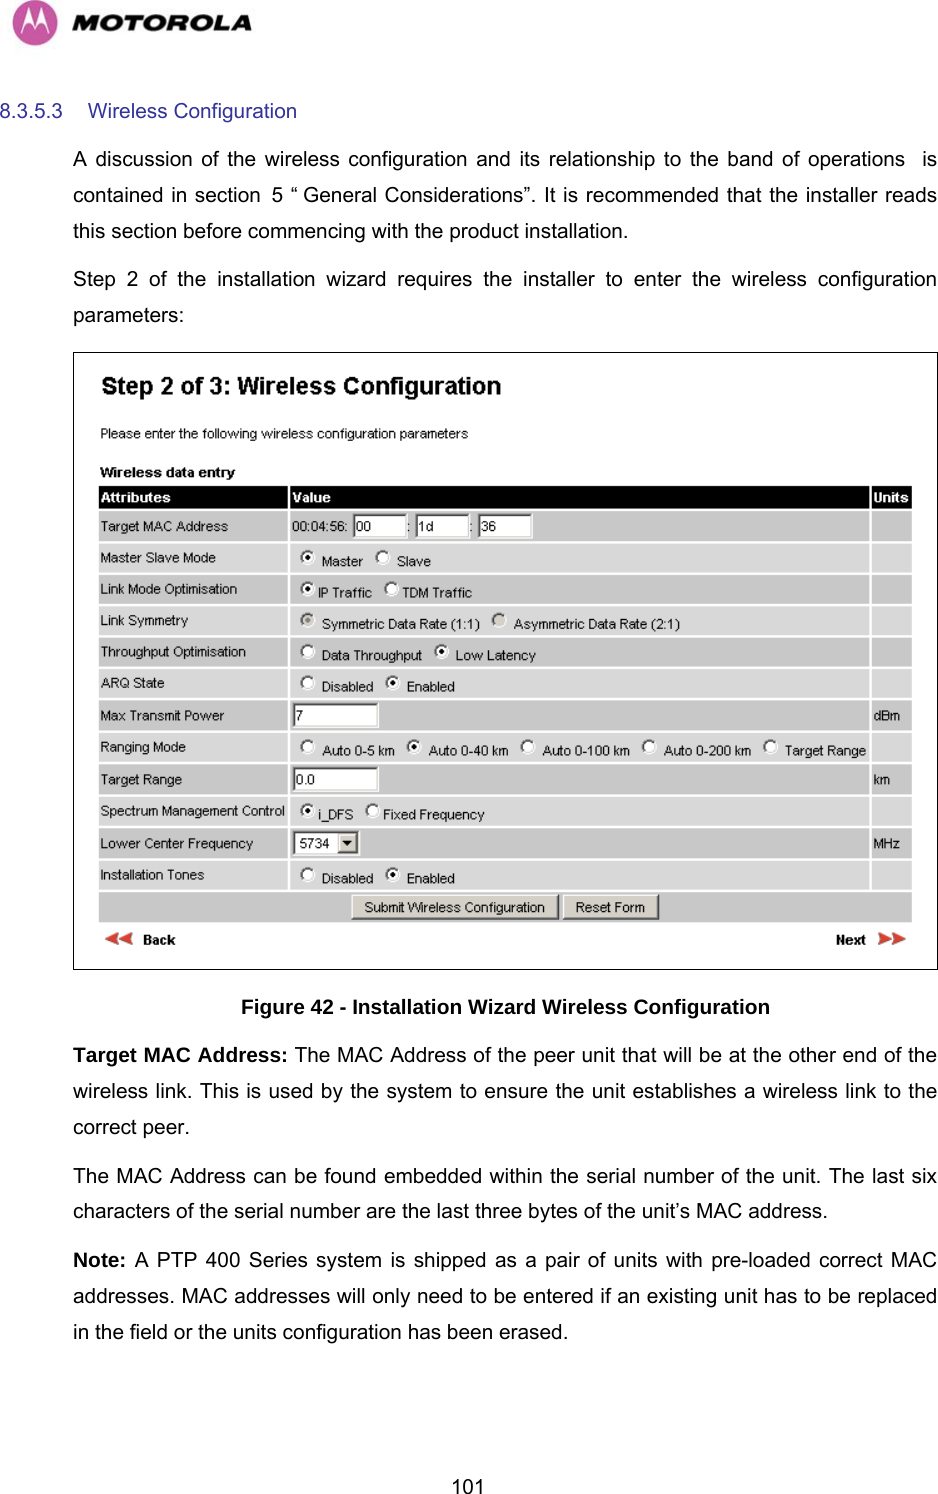   1018.3.5.3  Wireless Configuration  A discussion of the wireless configuration and its relationship to the band of operations  is contained in section H5 “HGeneral Considerations”. It is recommended that the installer reads this section before commencing with the product installation. Step 2 of the installation wizard requires the installer to enter the wireless configuration parameters:  Figure 42 - Installation Wizard Wireless Configuration Target MAC Address: The MAC Address of the peer unit that will be at the other end of the wireless link. This is used by the system to ensure the unit establishes a wireless link to the correct peer.  The MAC Address can be found embedded within the serial number of the unit. The last six characters of the serial number are the last three bytes of the unit’s MAC address. Note: A PTP 400 Series system is shipped as a pair of units with pre-loaded correct MAC addresses. MAC addresses will only need to be entered if an existing unit has to be replaced in the field or the units configuration has been erased. 